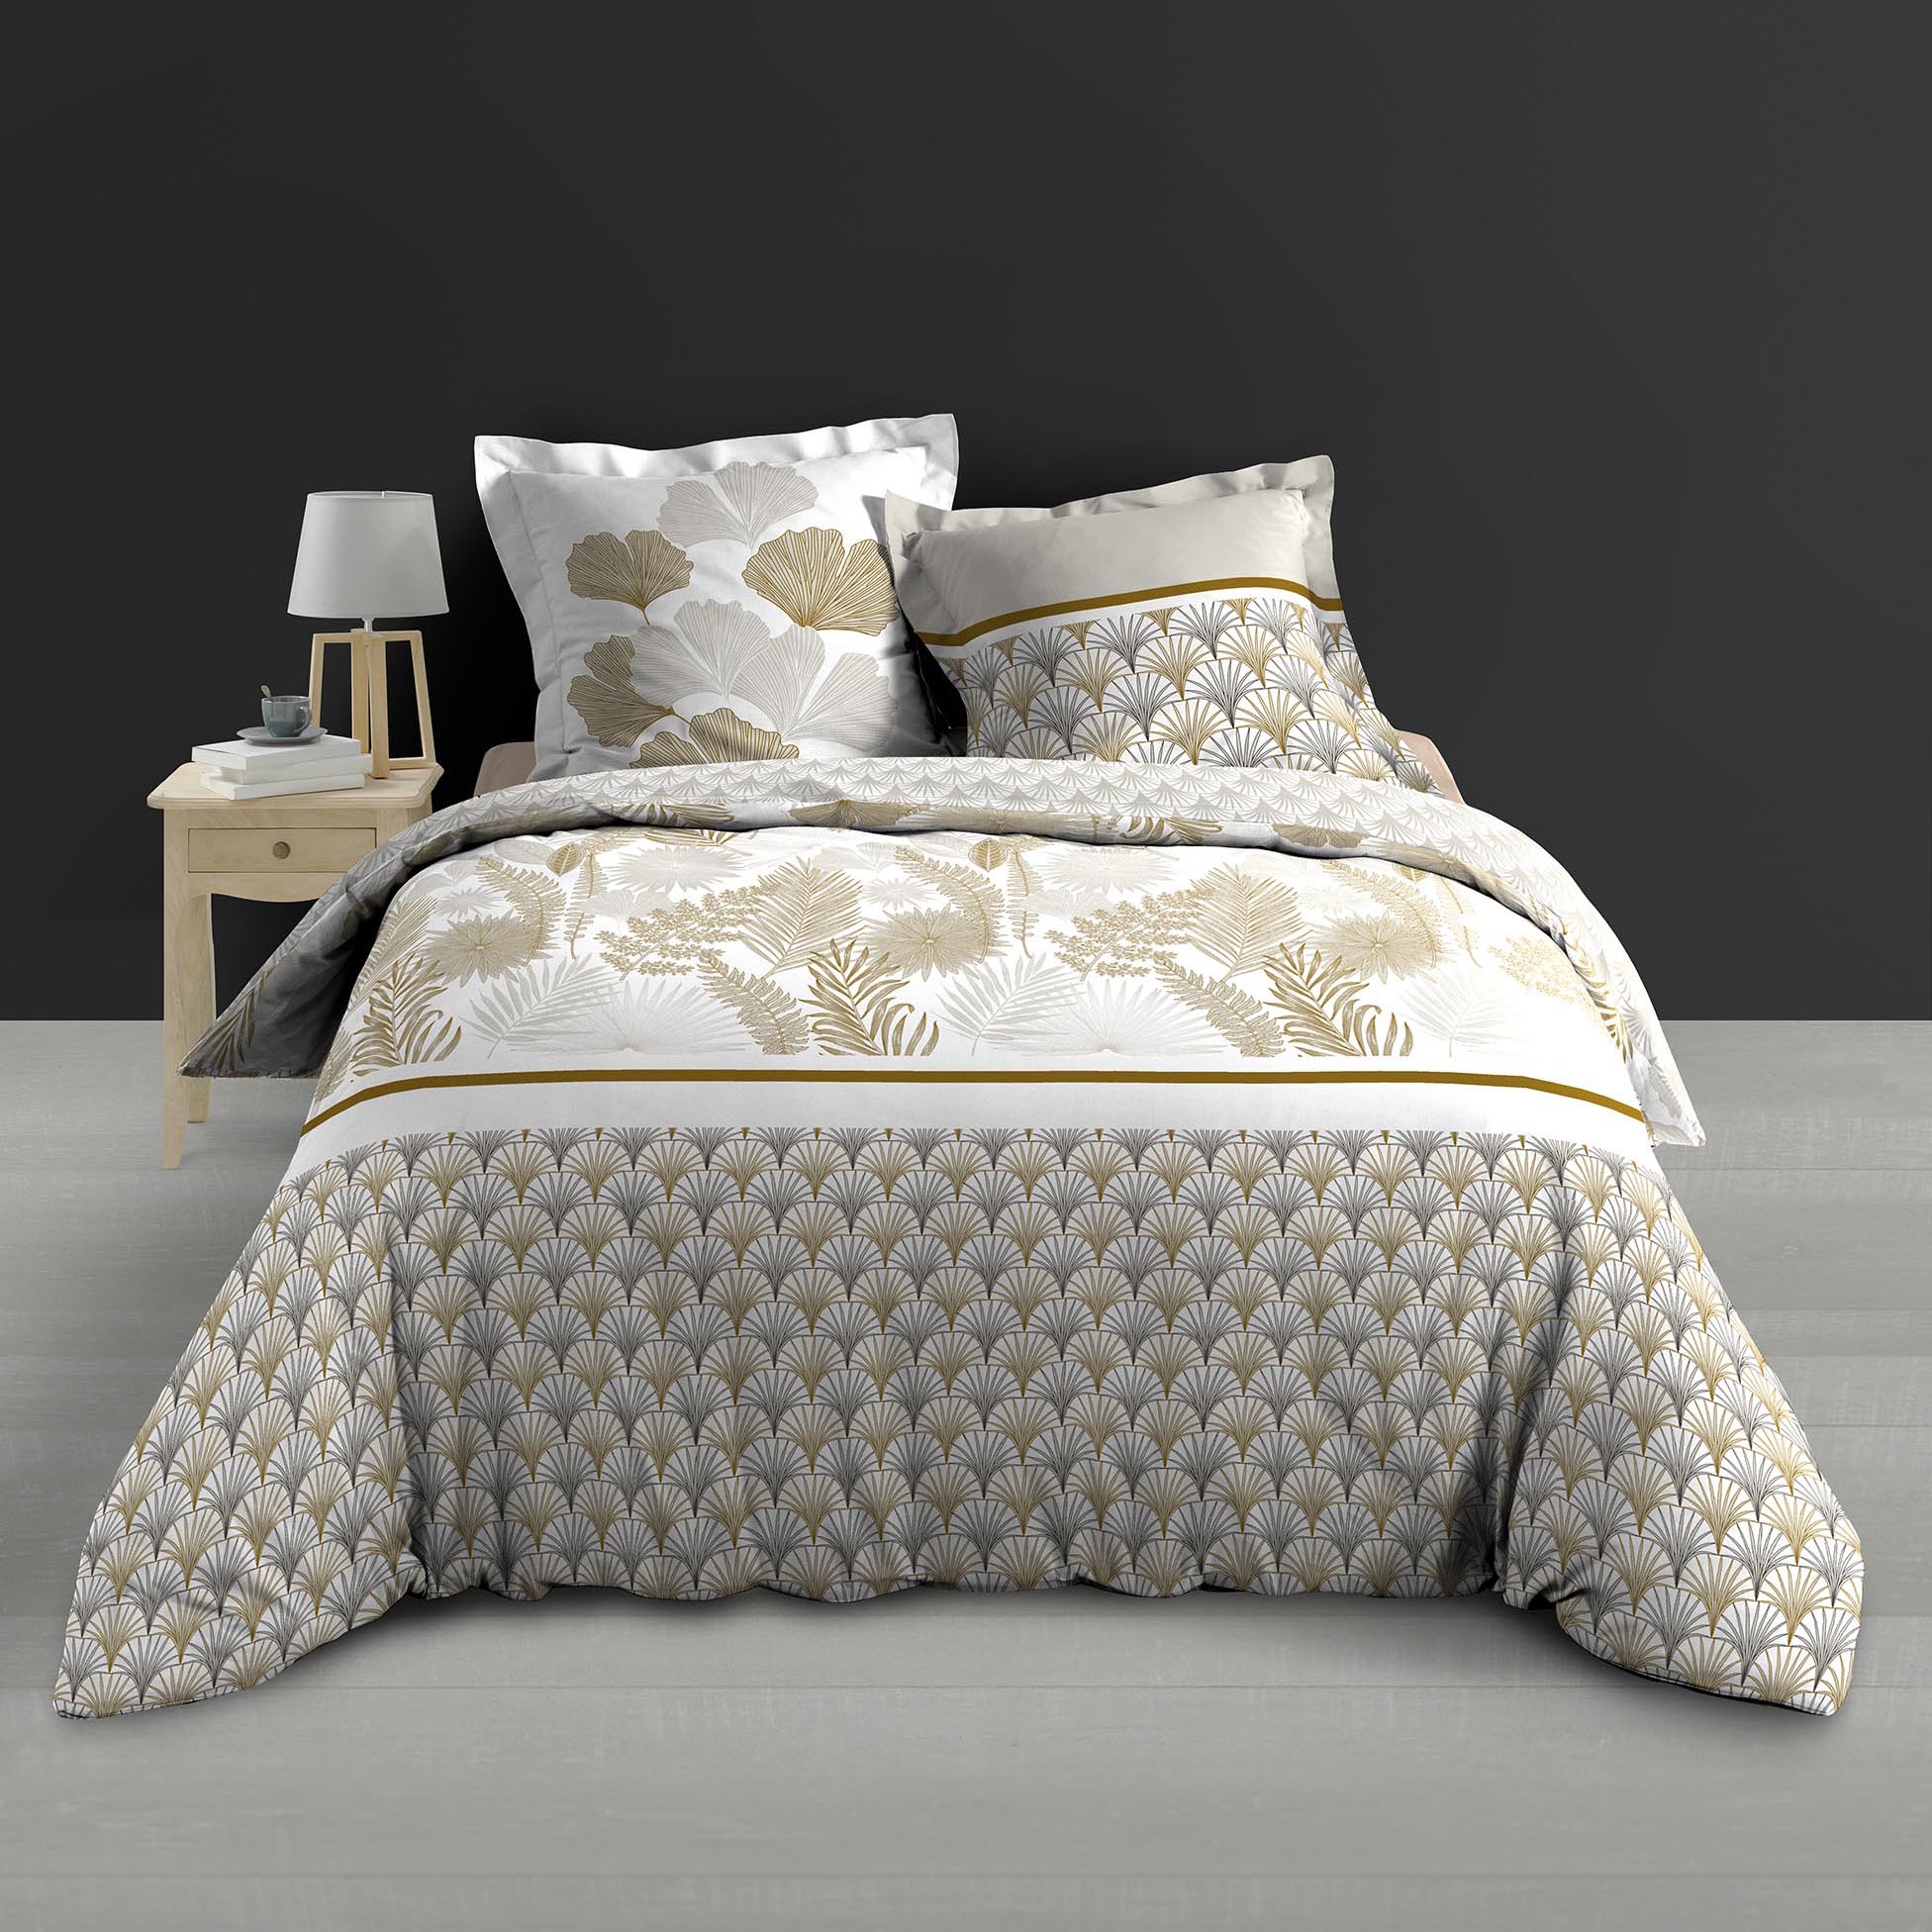 Housse couette + taies percale 220 x 240 cm Art deco